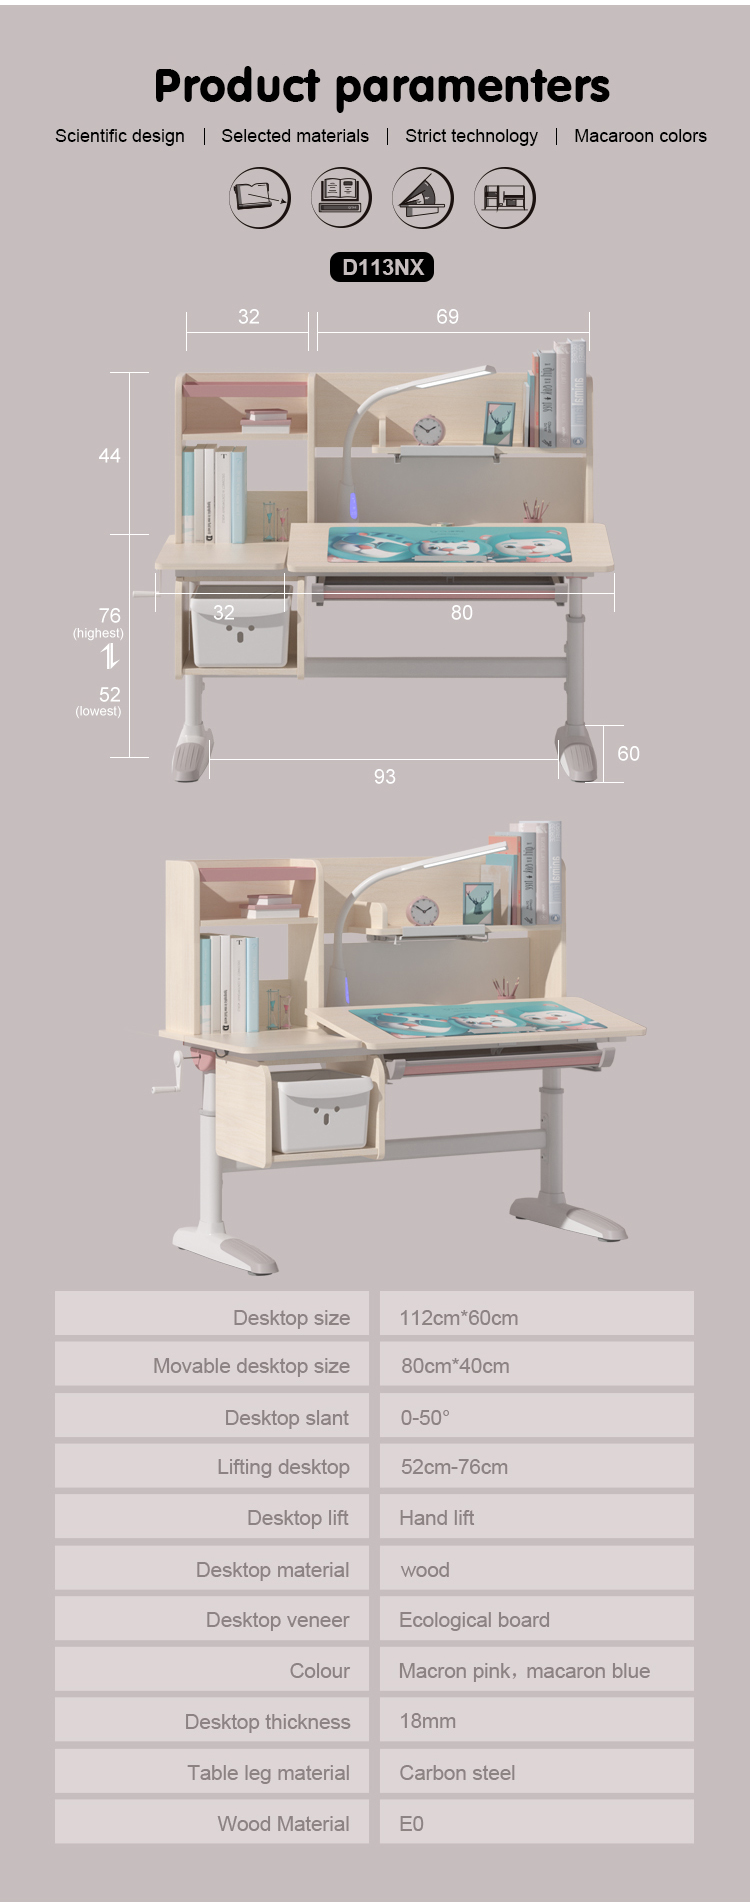 desk and chair